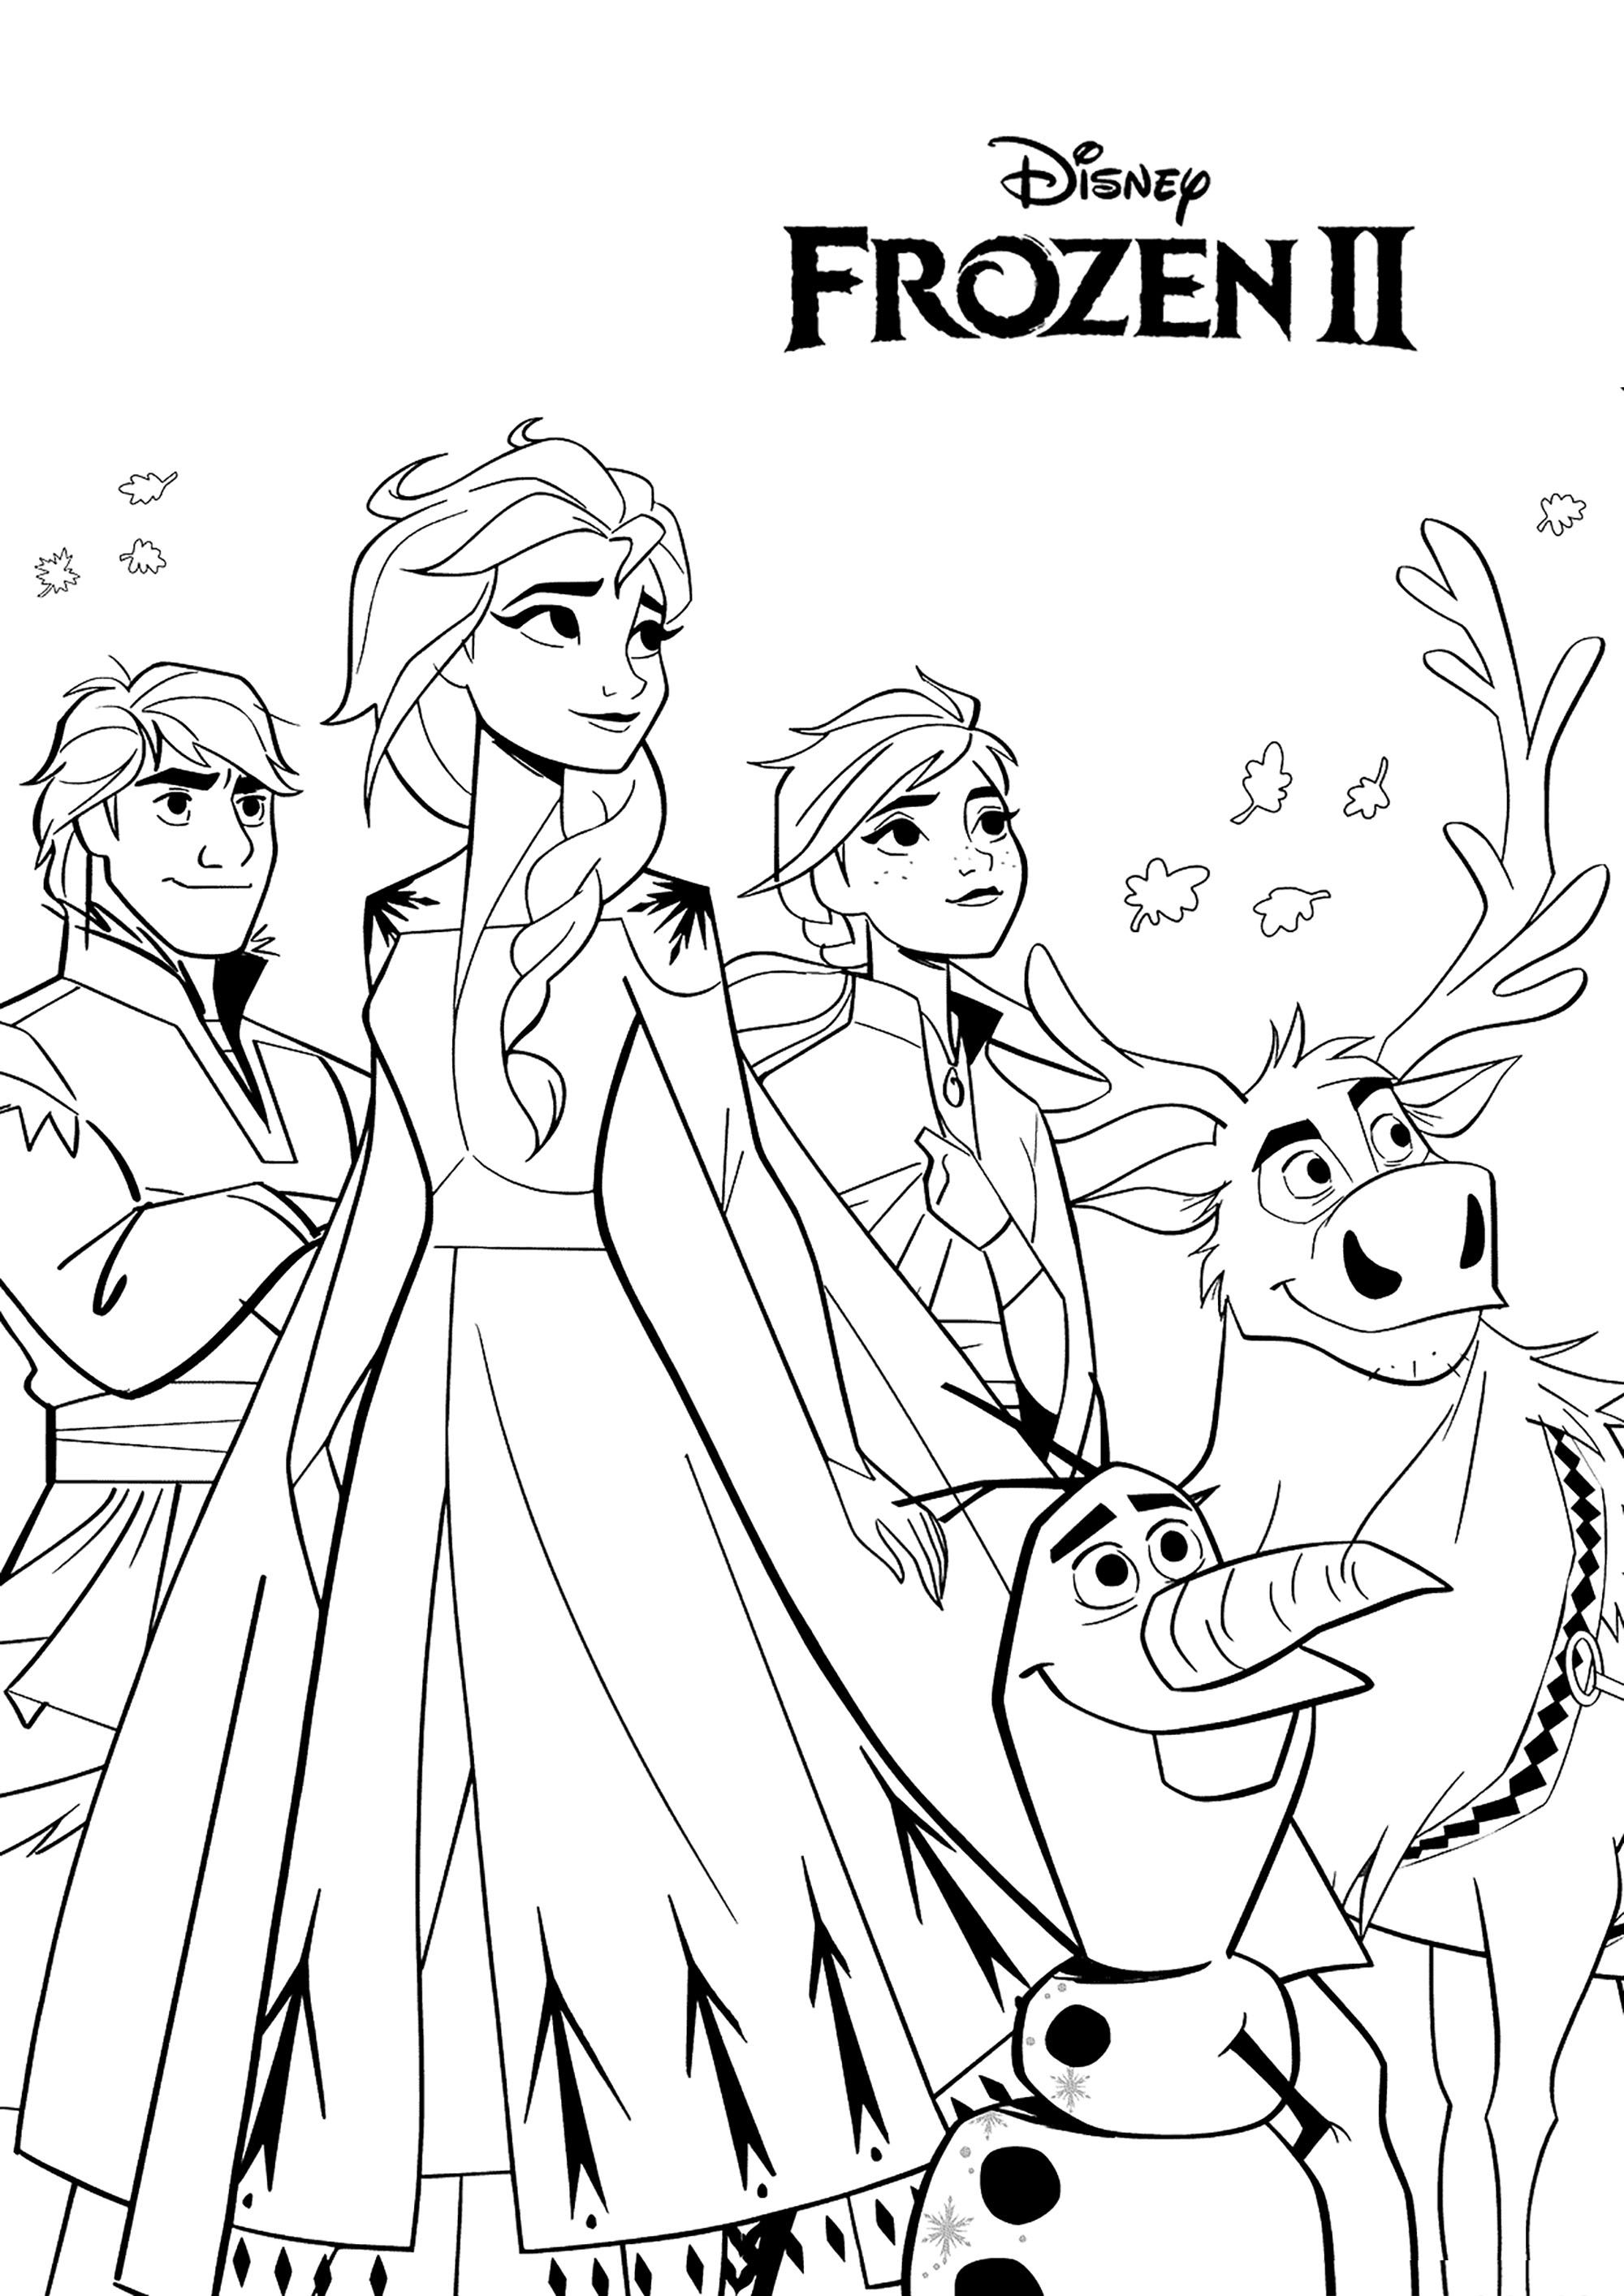 Download Frozen 2 to print - Frozen 2 Kids Coloring Pages